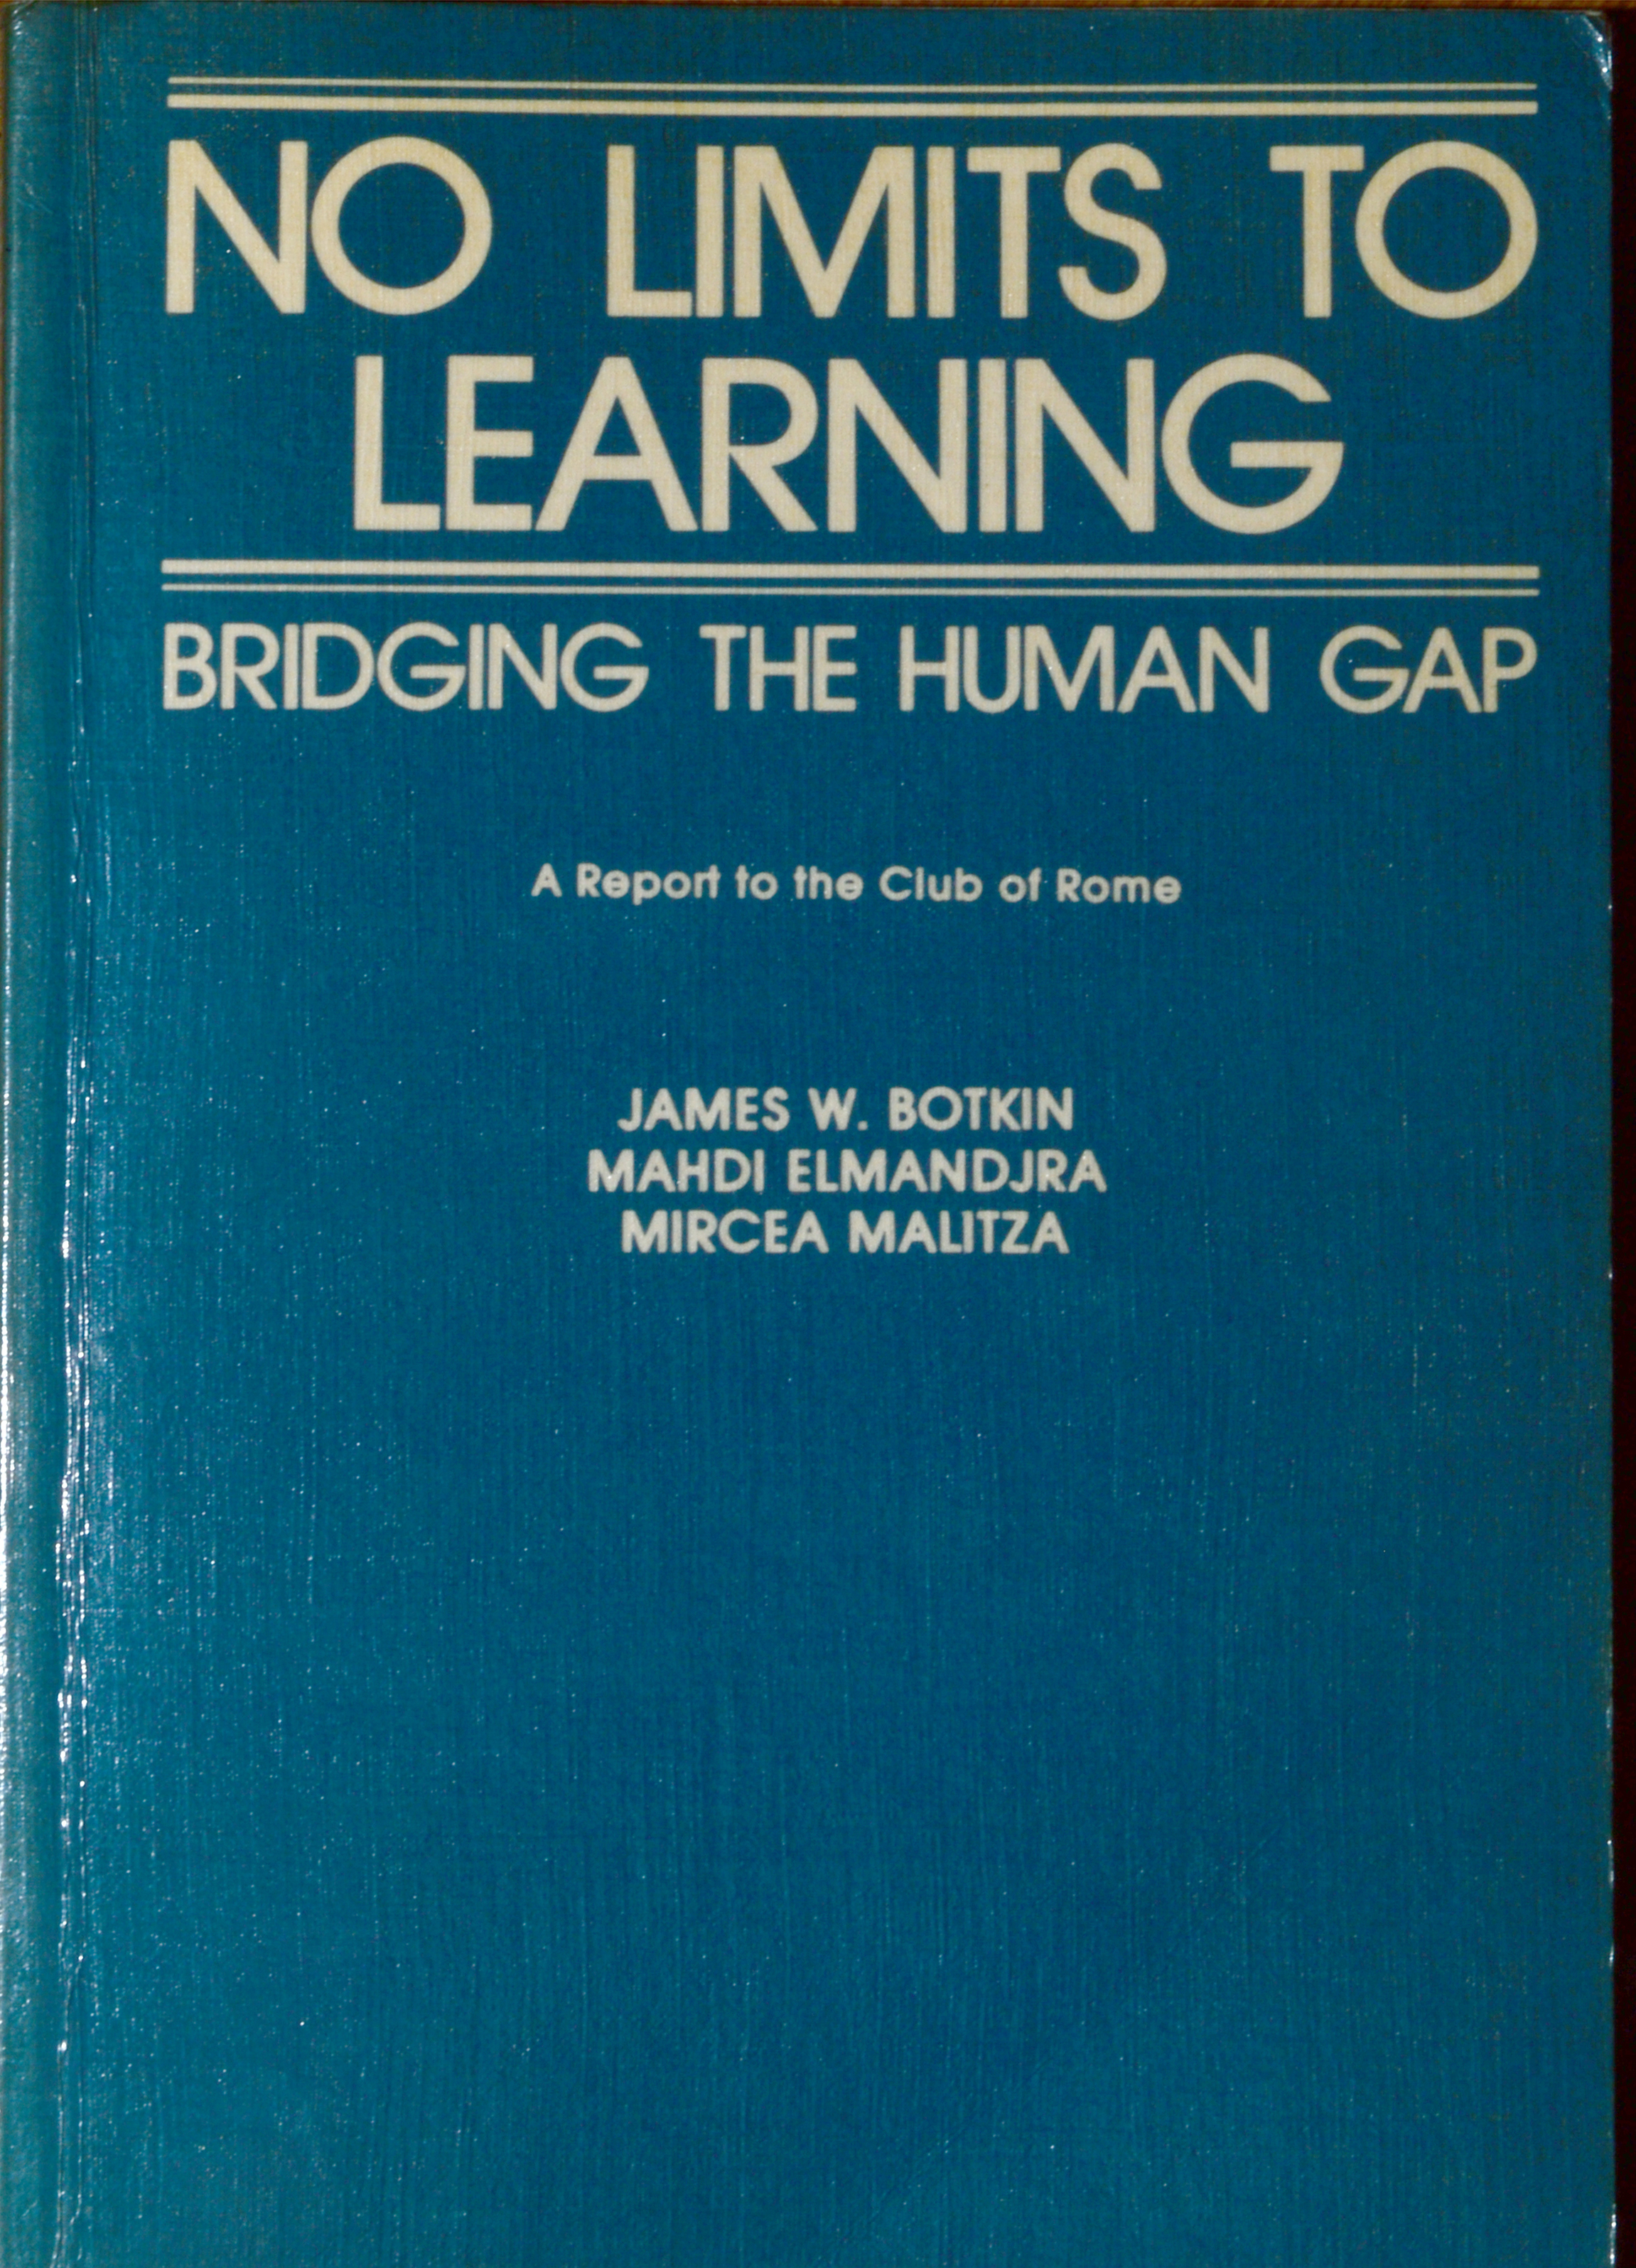 No limits to learning: Bridging the human gap